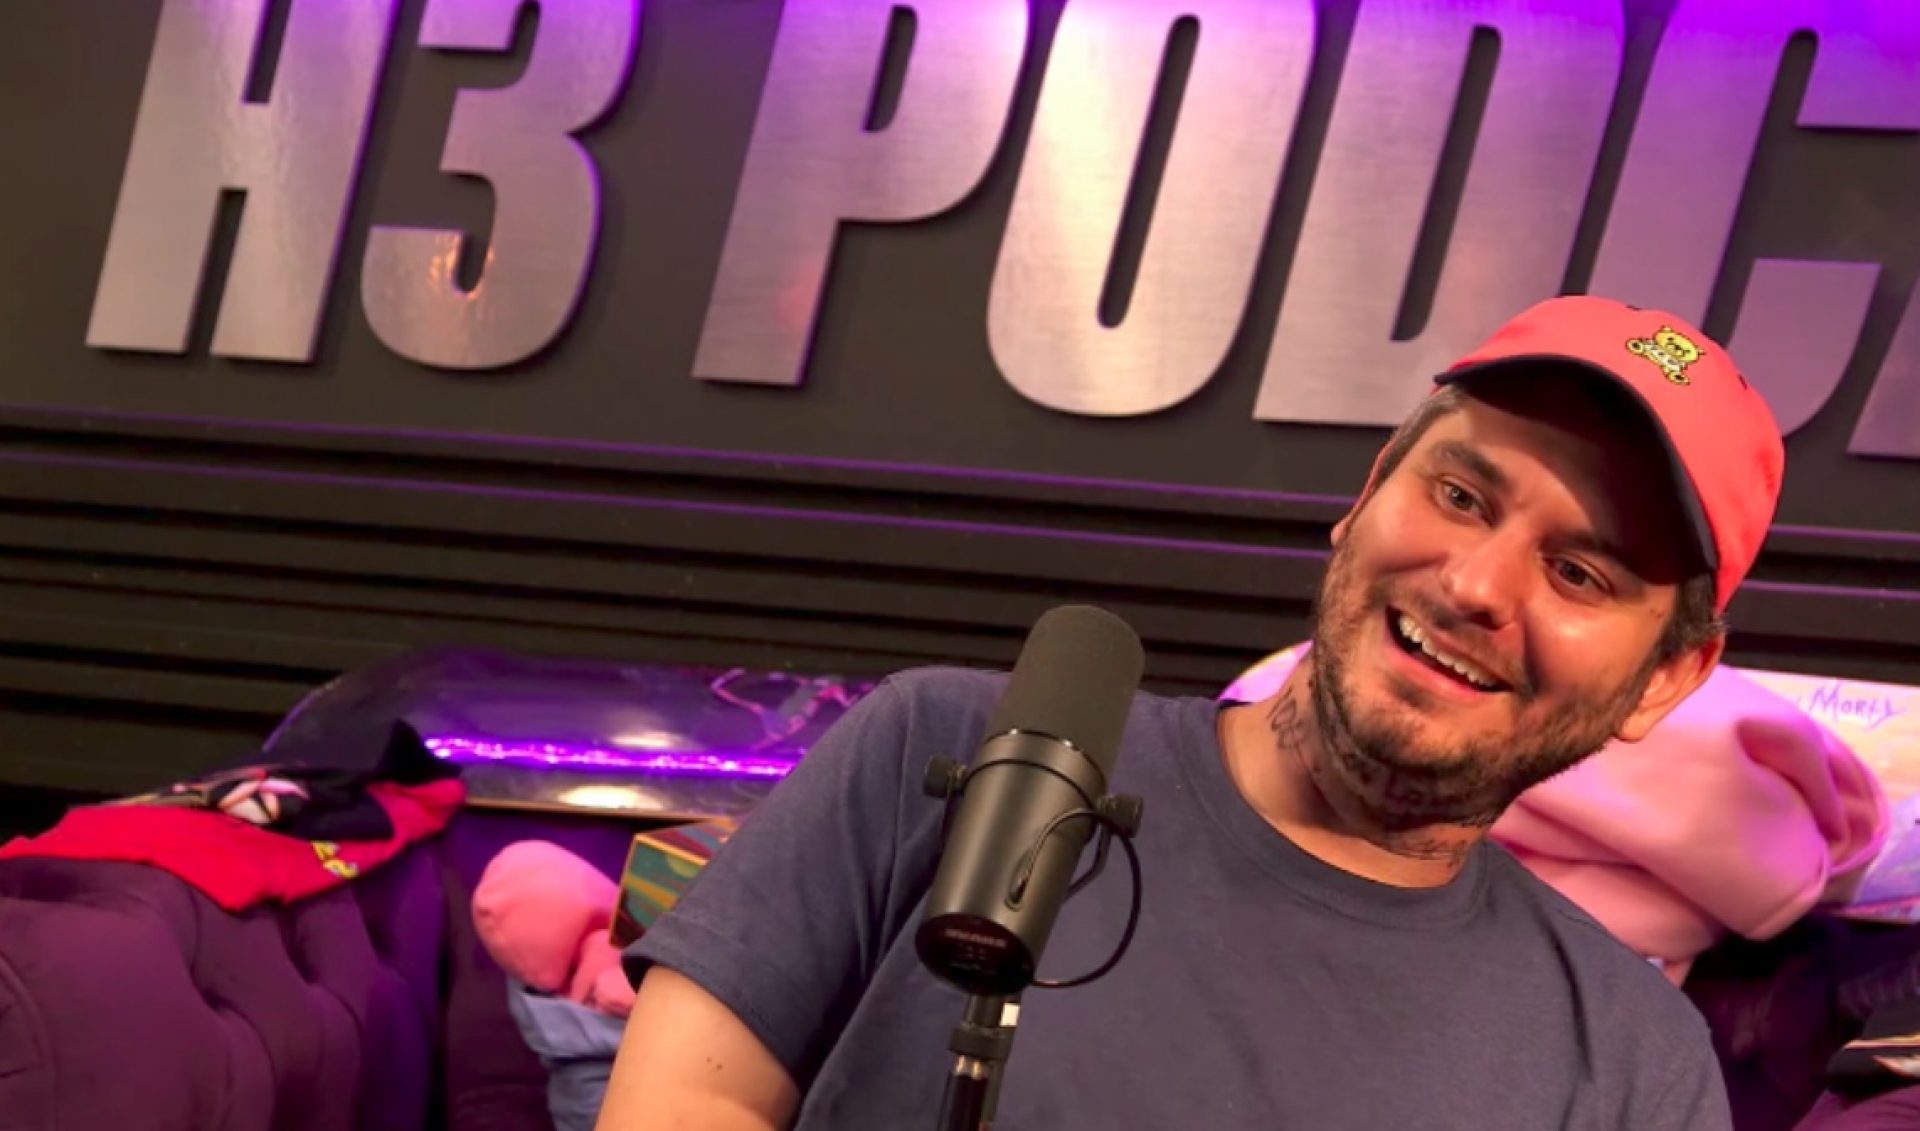 H3h3productions Raises Over $100,000 With Twitch Live Stream To Support Hurricane Harvey Relief